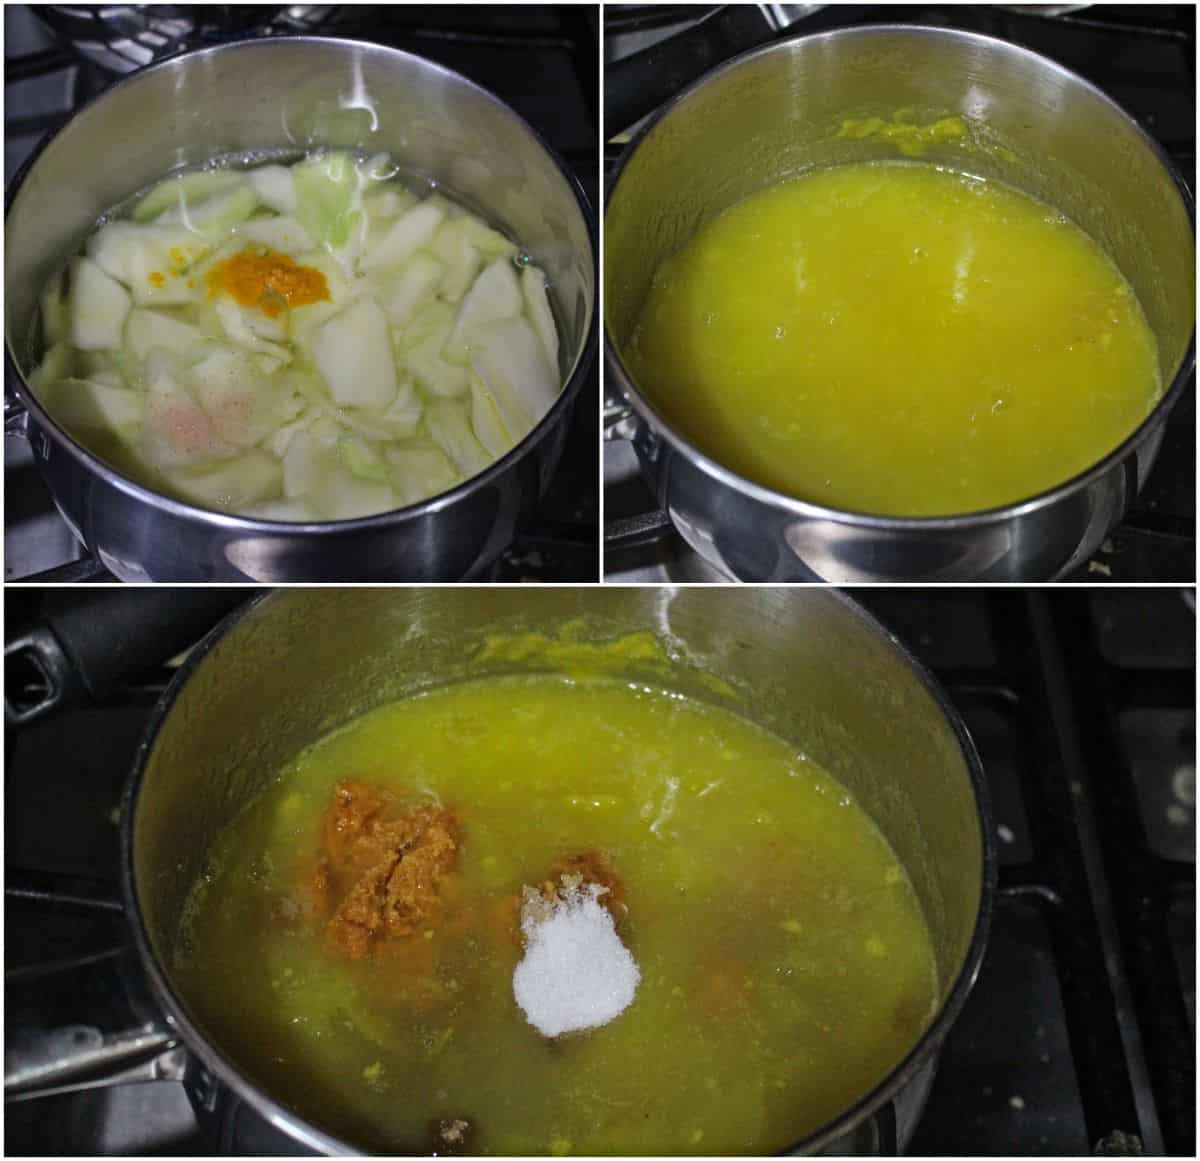 cooking the raw mango in water with turmeric powder and jaggery